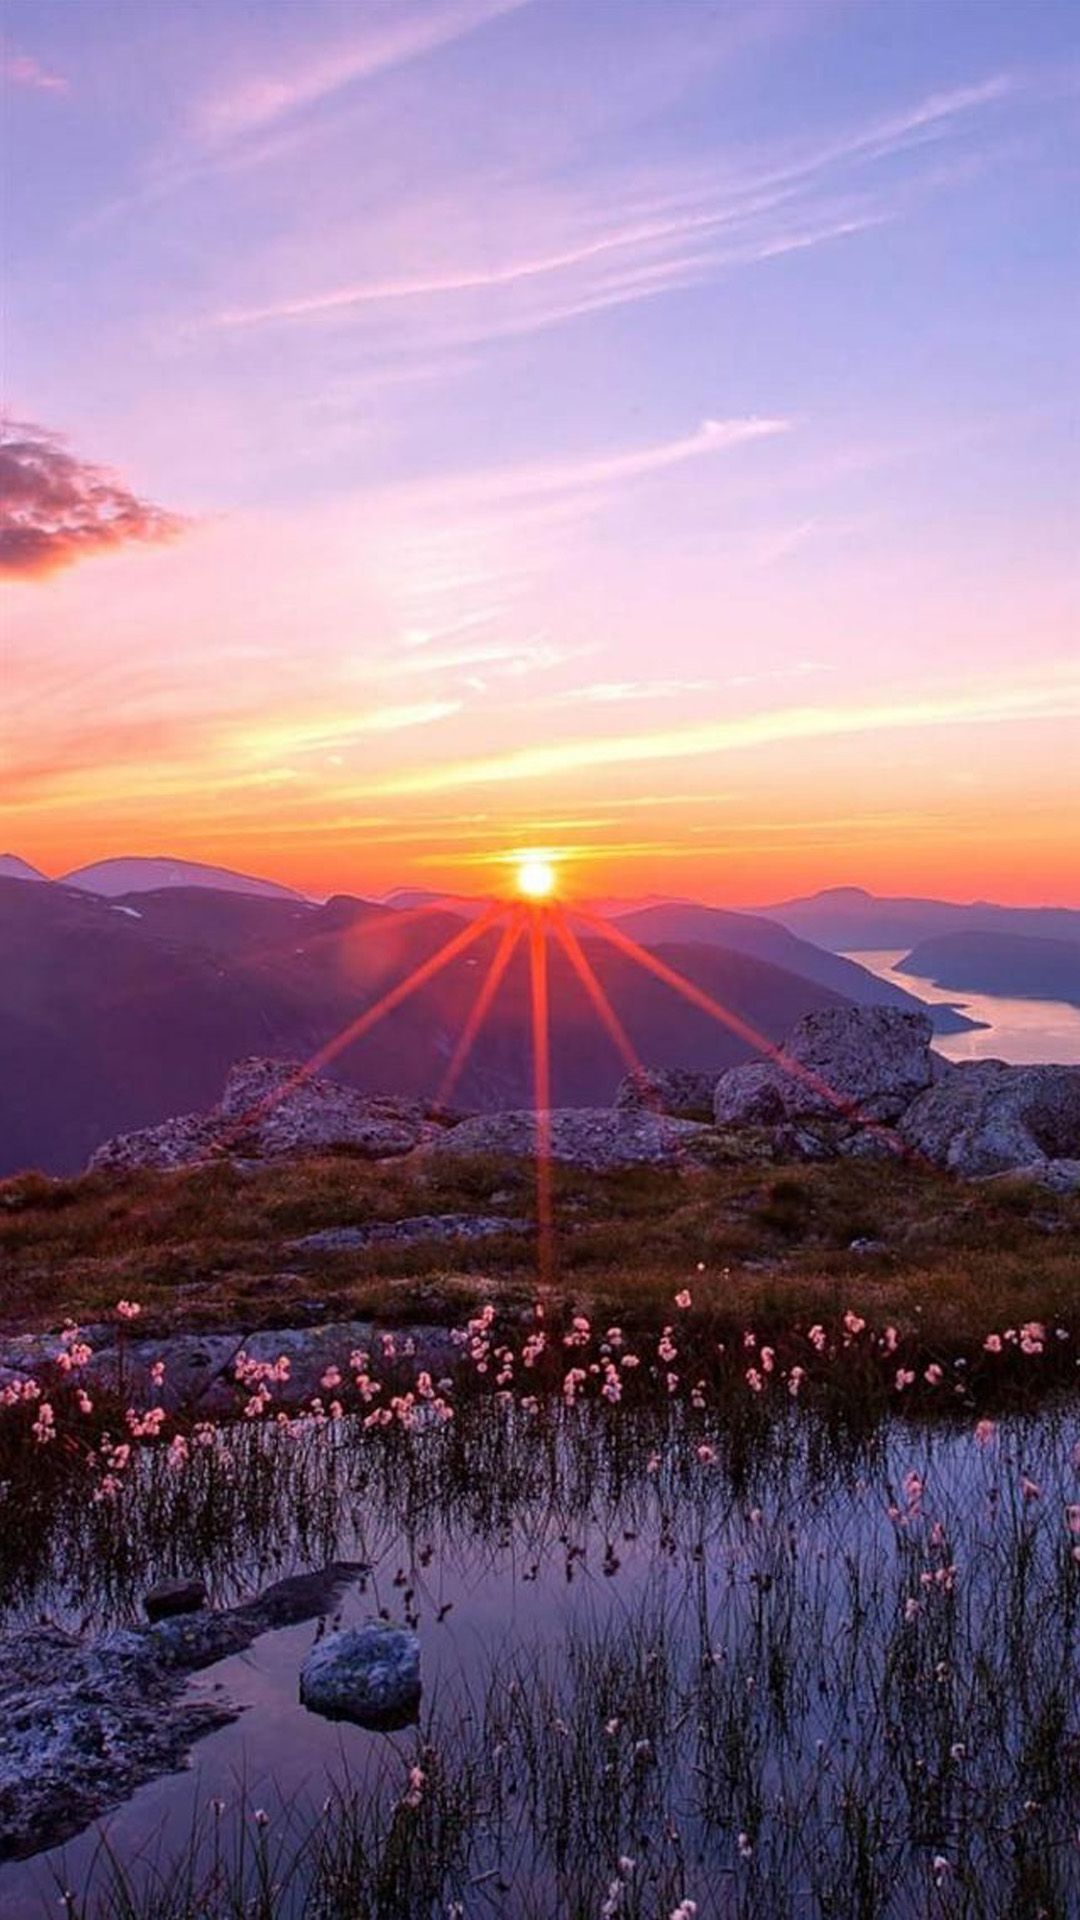 The sun rising over a mountain with a field of flowers in the foreground. - Sunrise